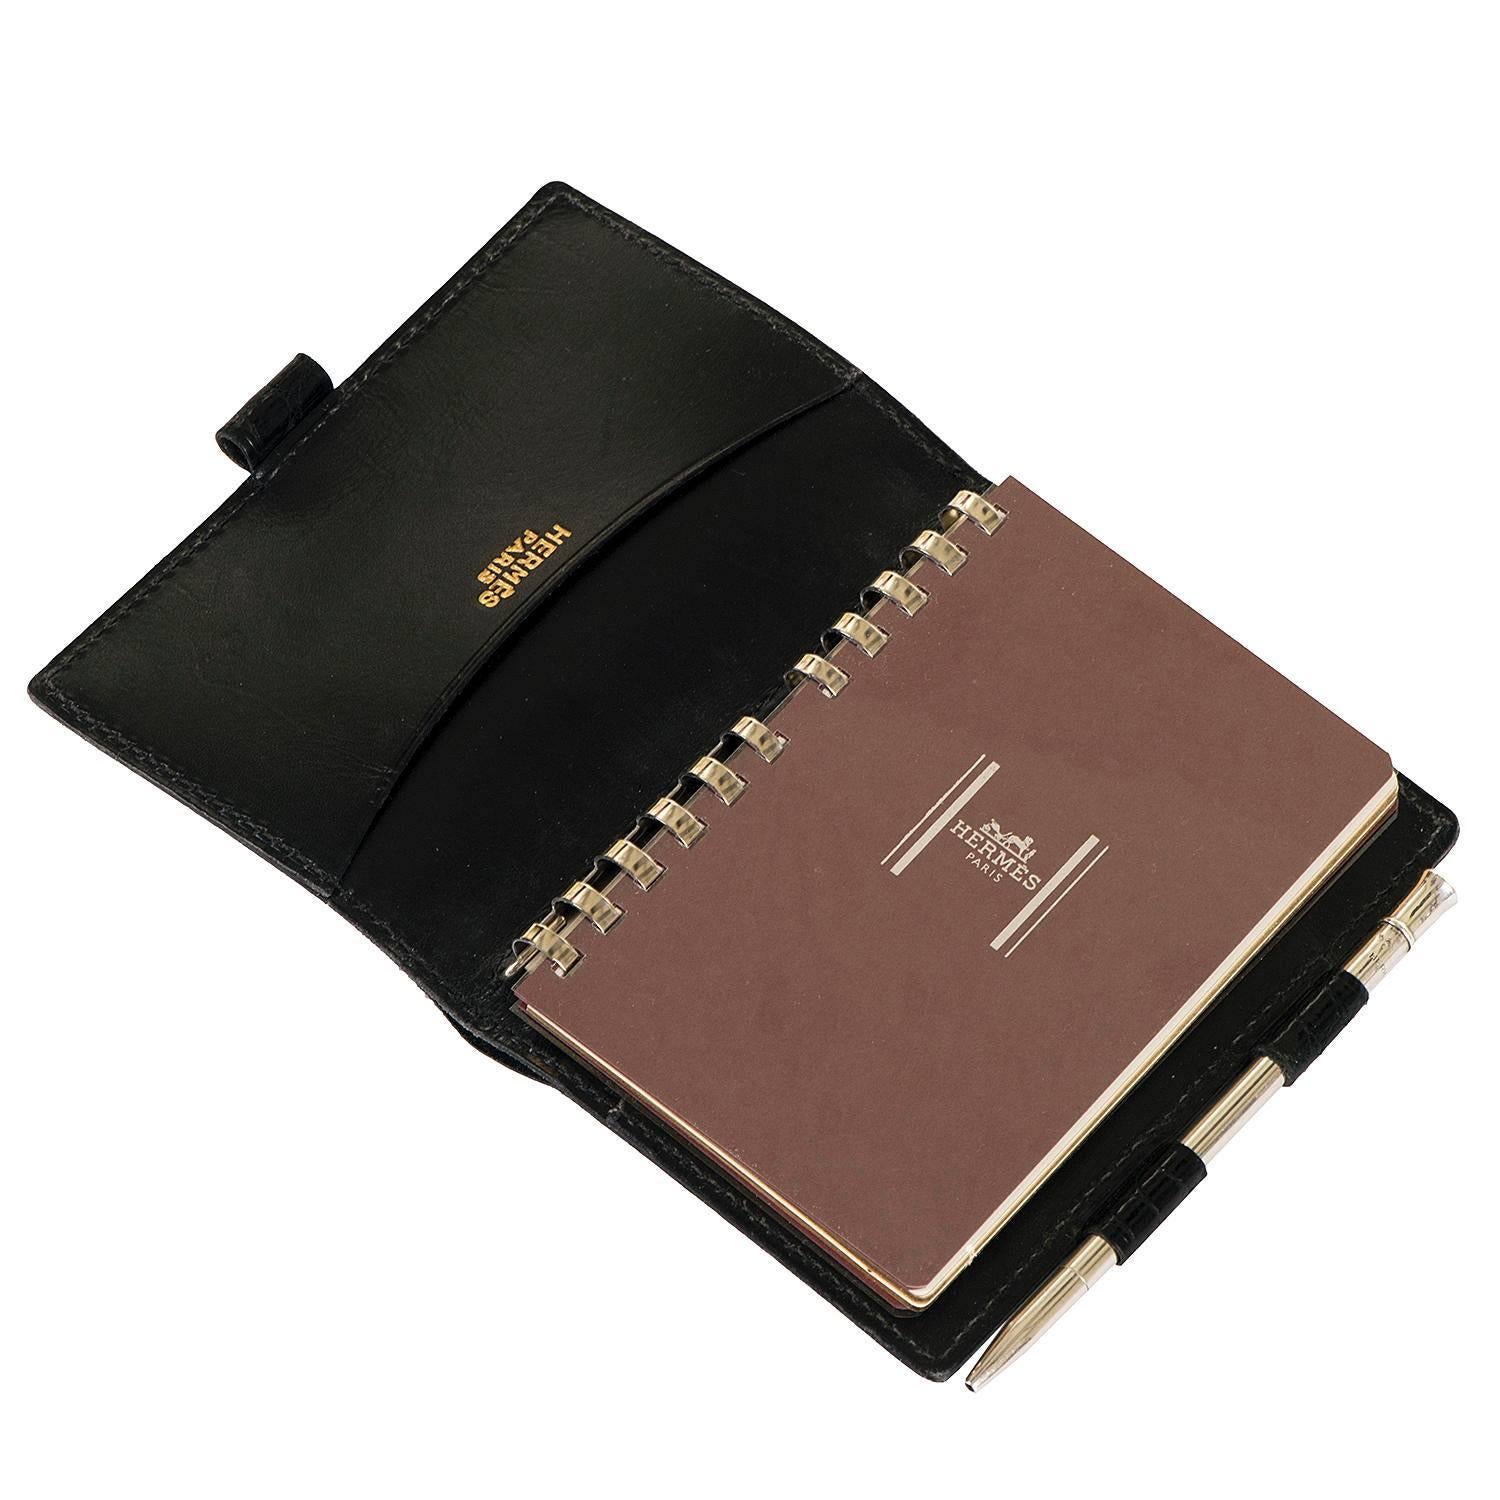 A Rare Vintage Hermes Agenda/Notebook in absolutely pristine condition. Finished in Black Porous Crocodile, the Agenda retains it's original Silver propelling pencil with both the Agenda and silver pencil bearing the Hermes stamp. Fitted with a new